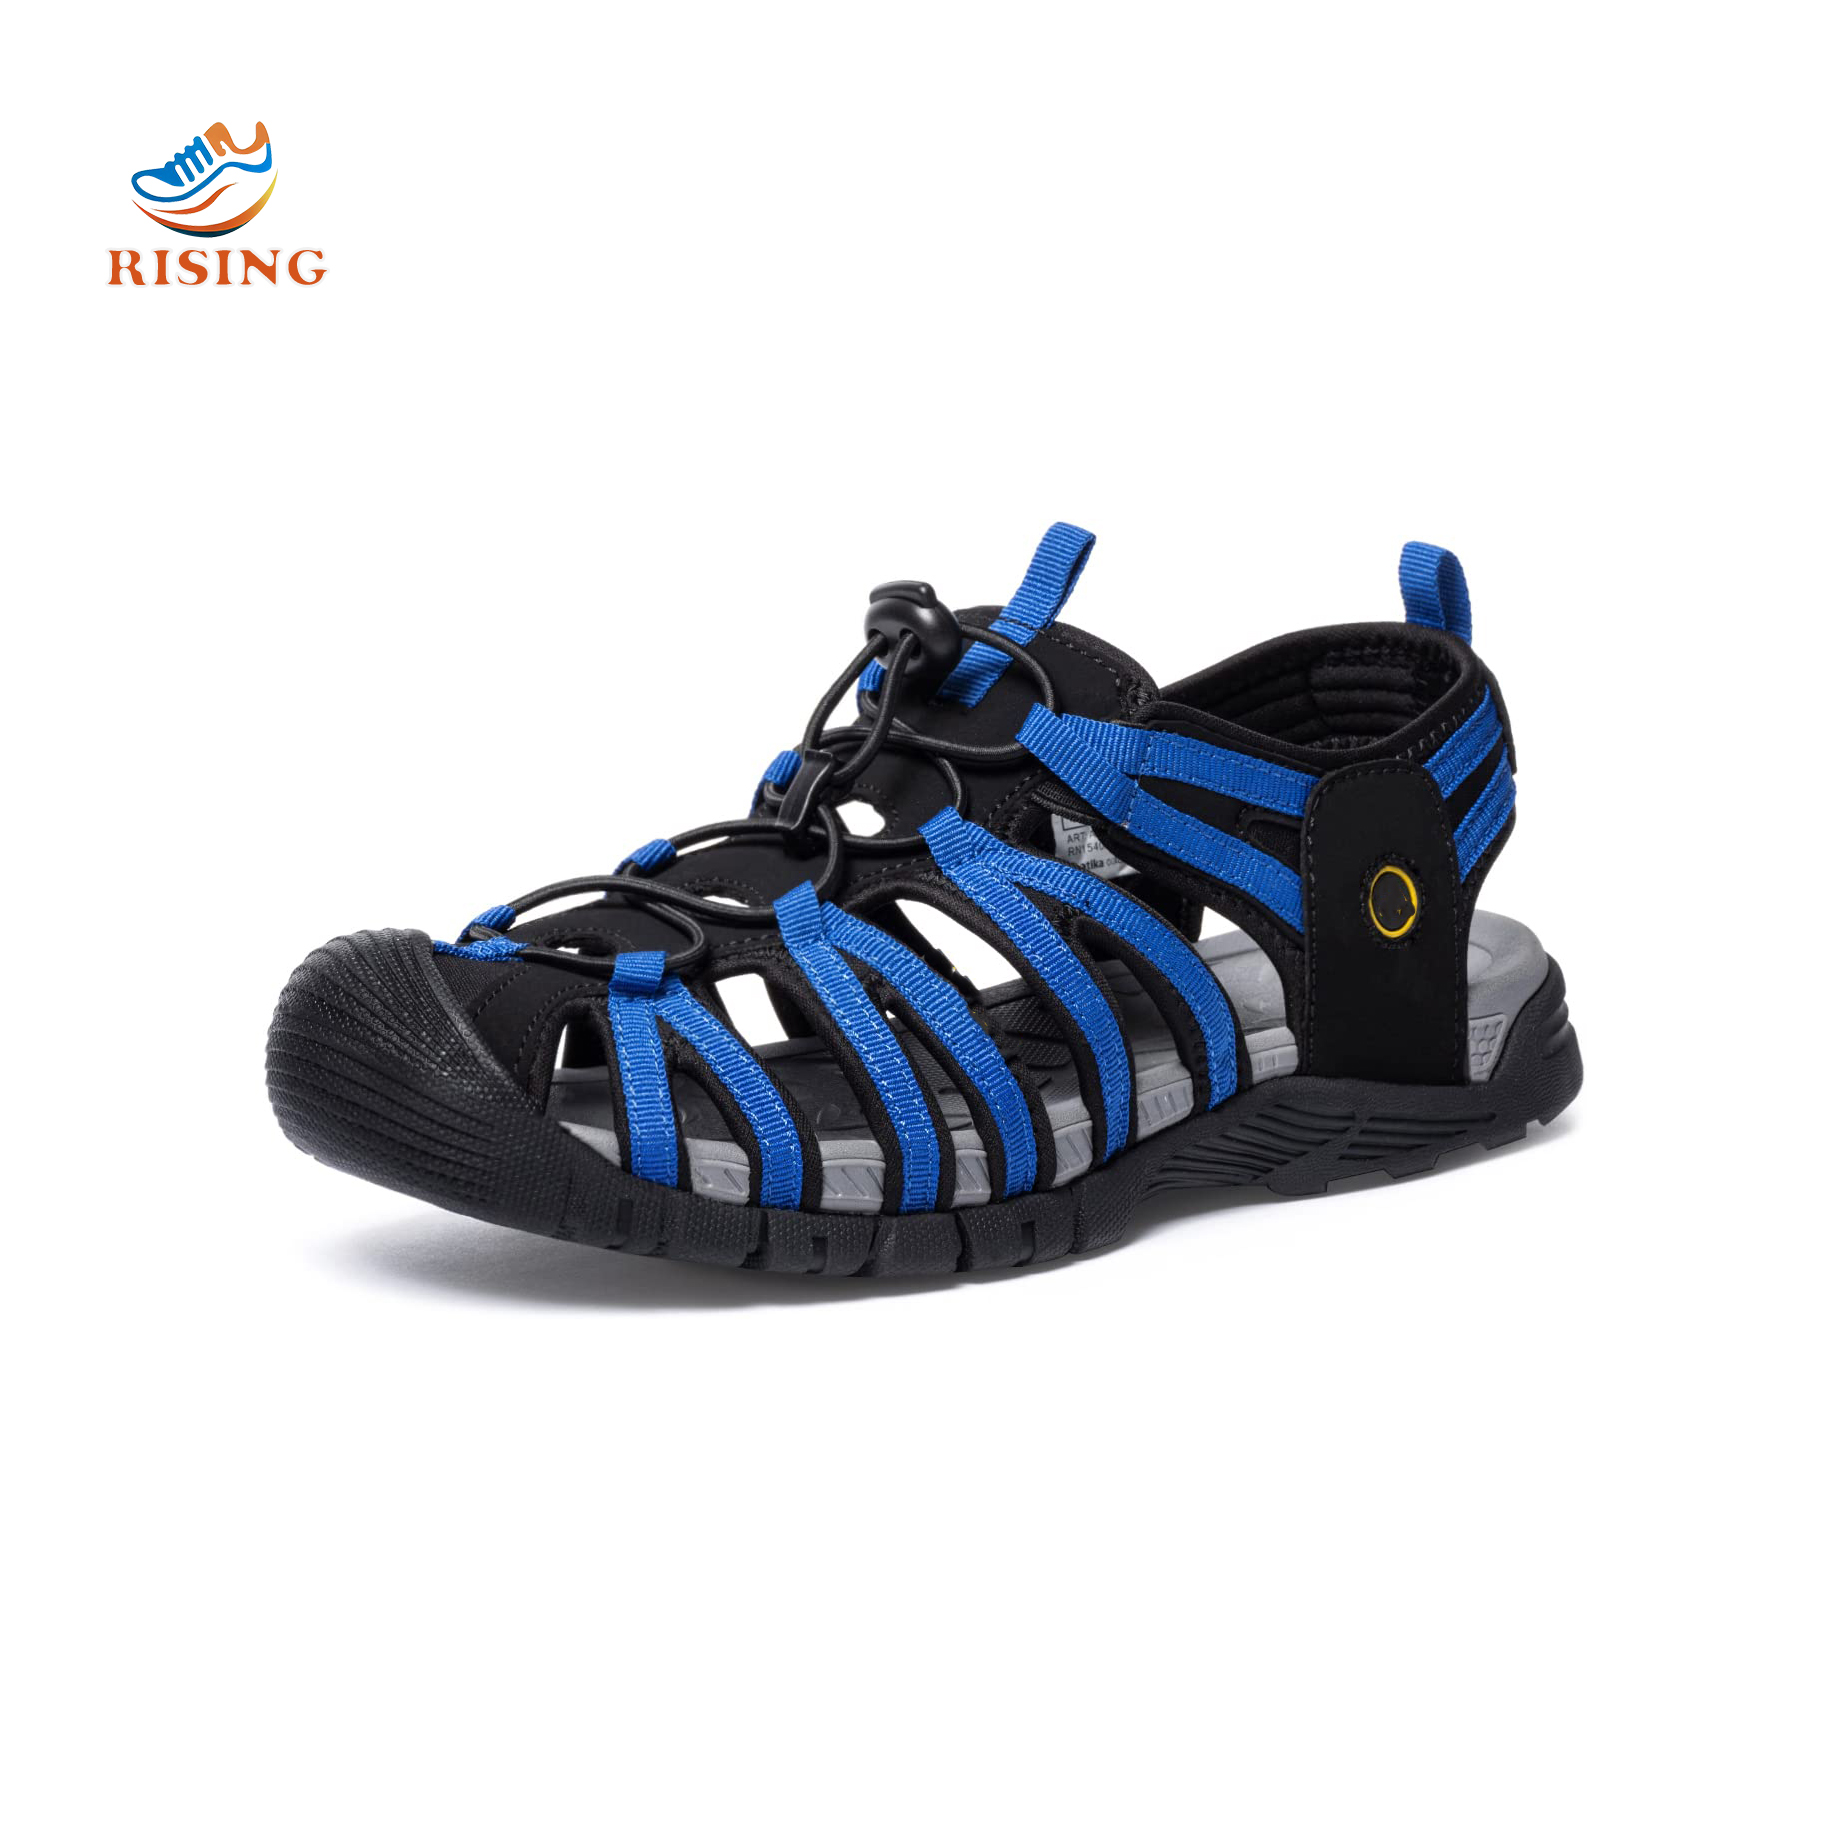  Men's Outdoor Sandals, Lightweight Trail Walking Hiking Sandals, Summer Athletic Sports Water Shoes